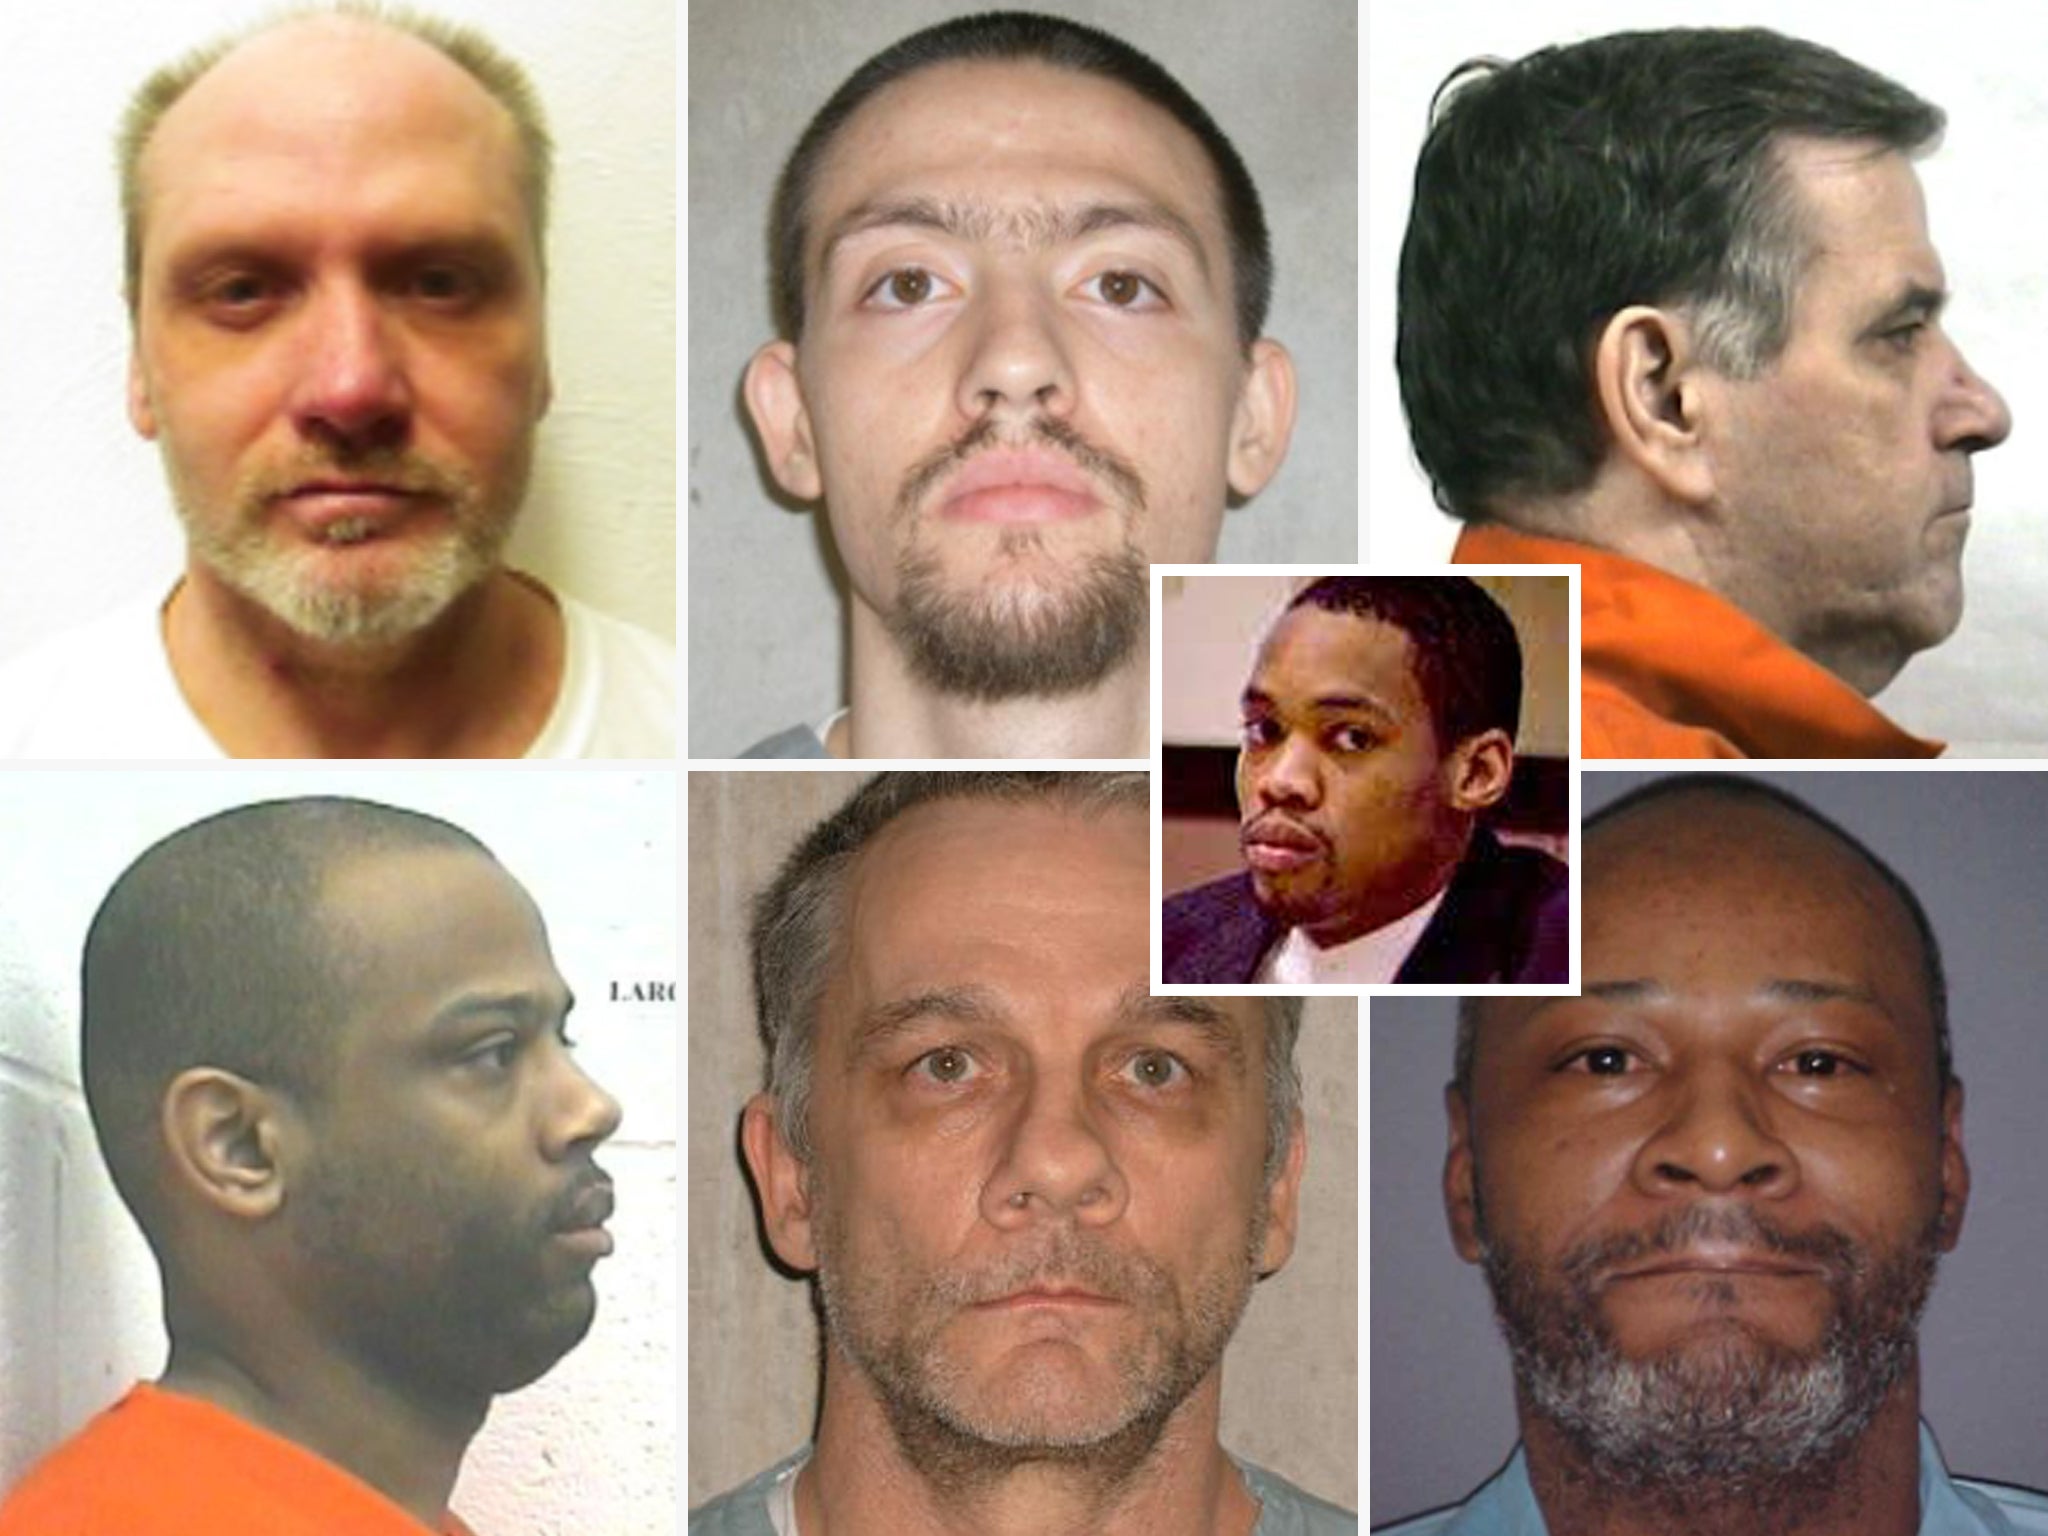 Oklahoma may execute seven death row inmates before their legal appeal in federal court can play out